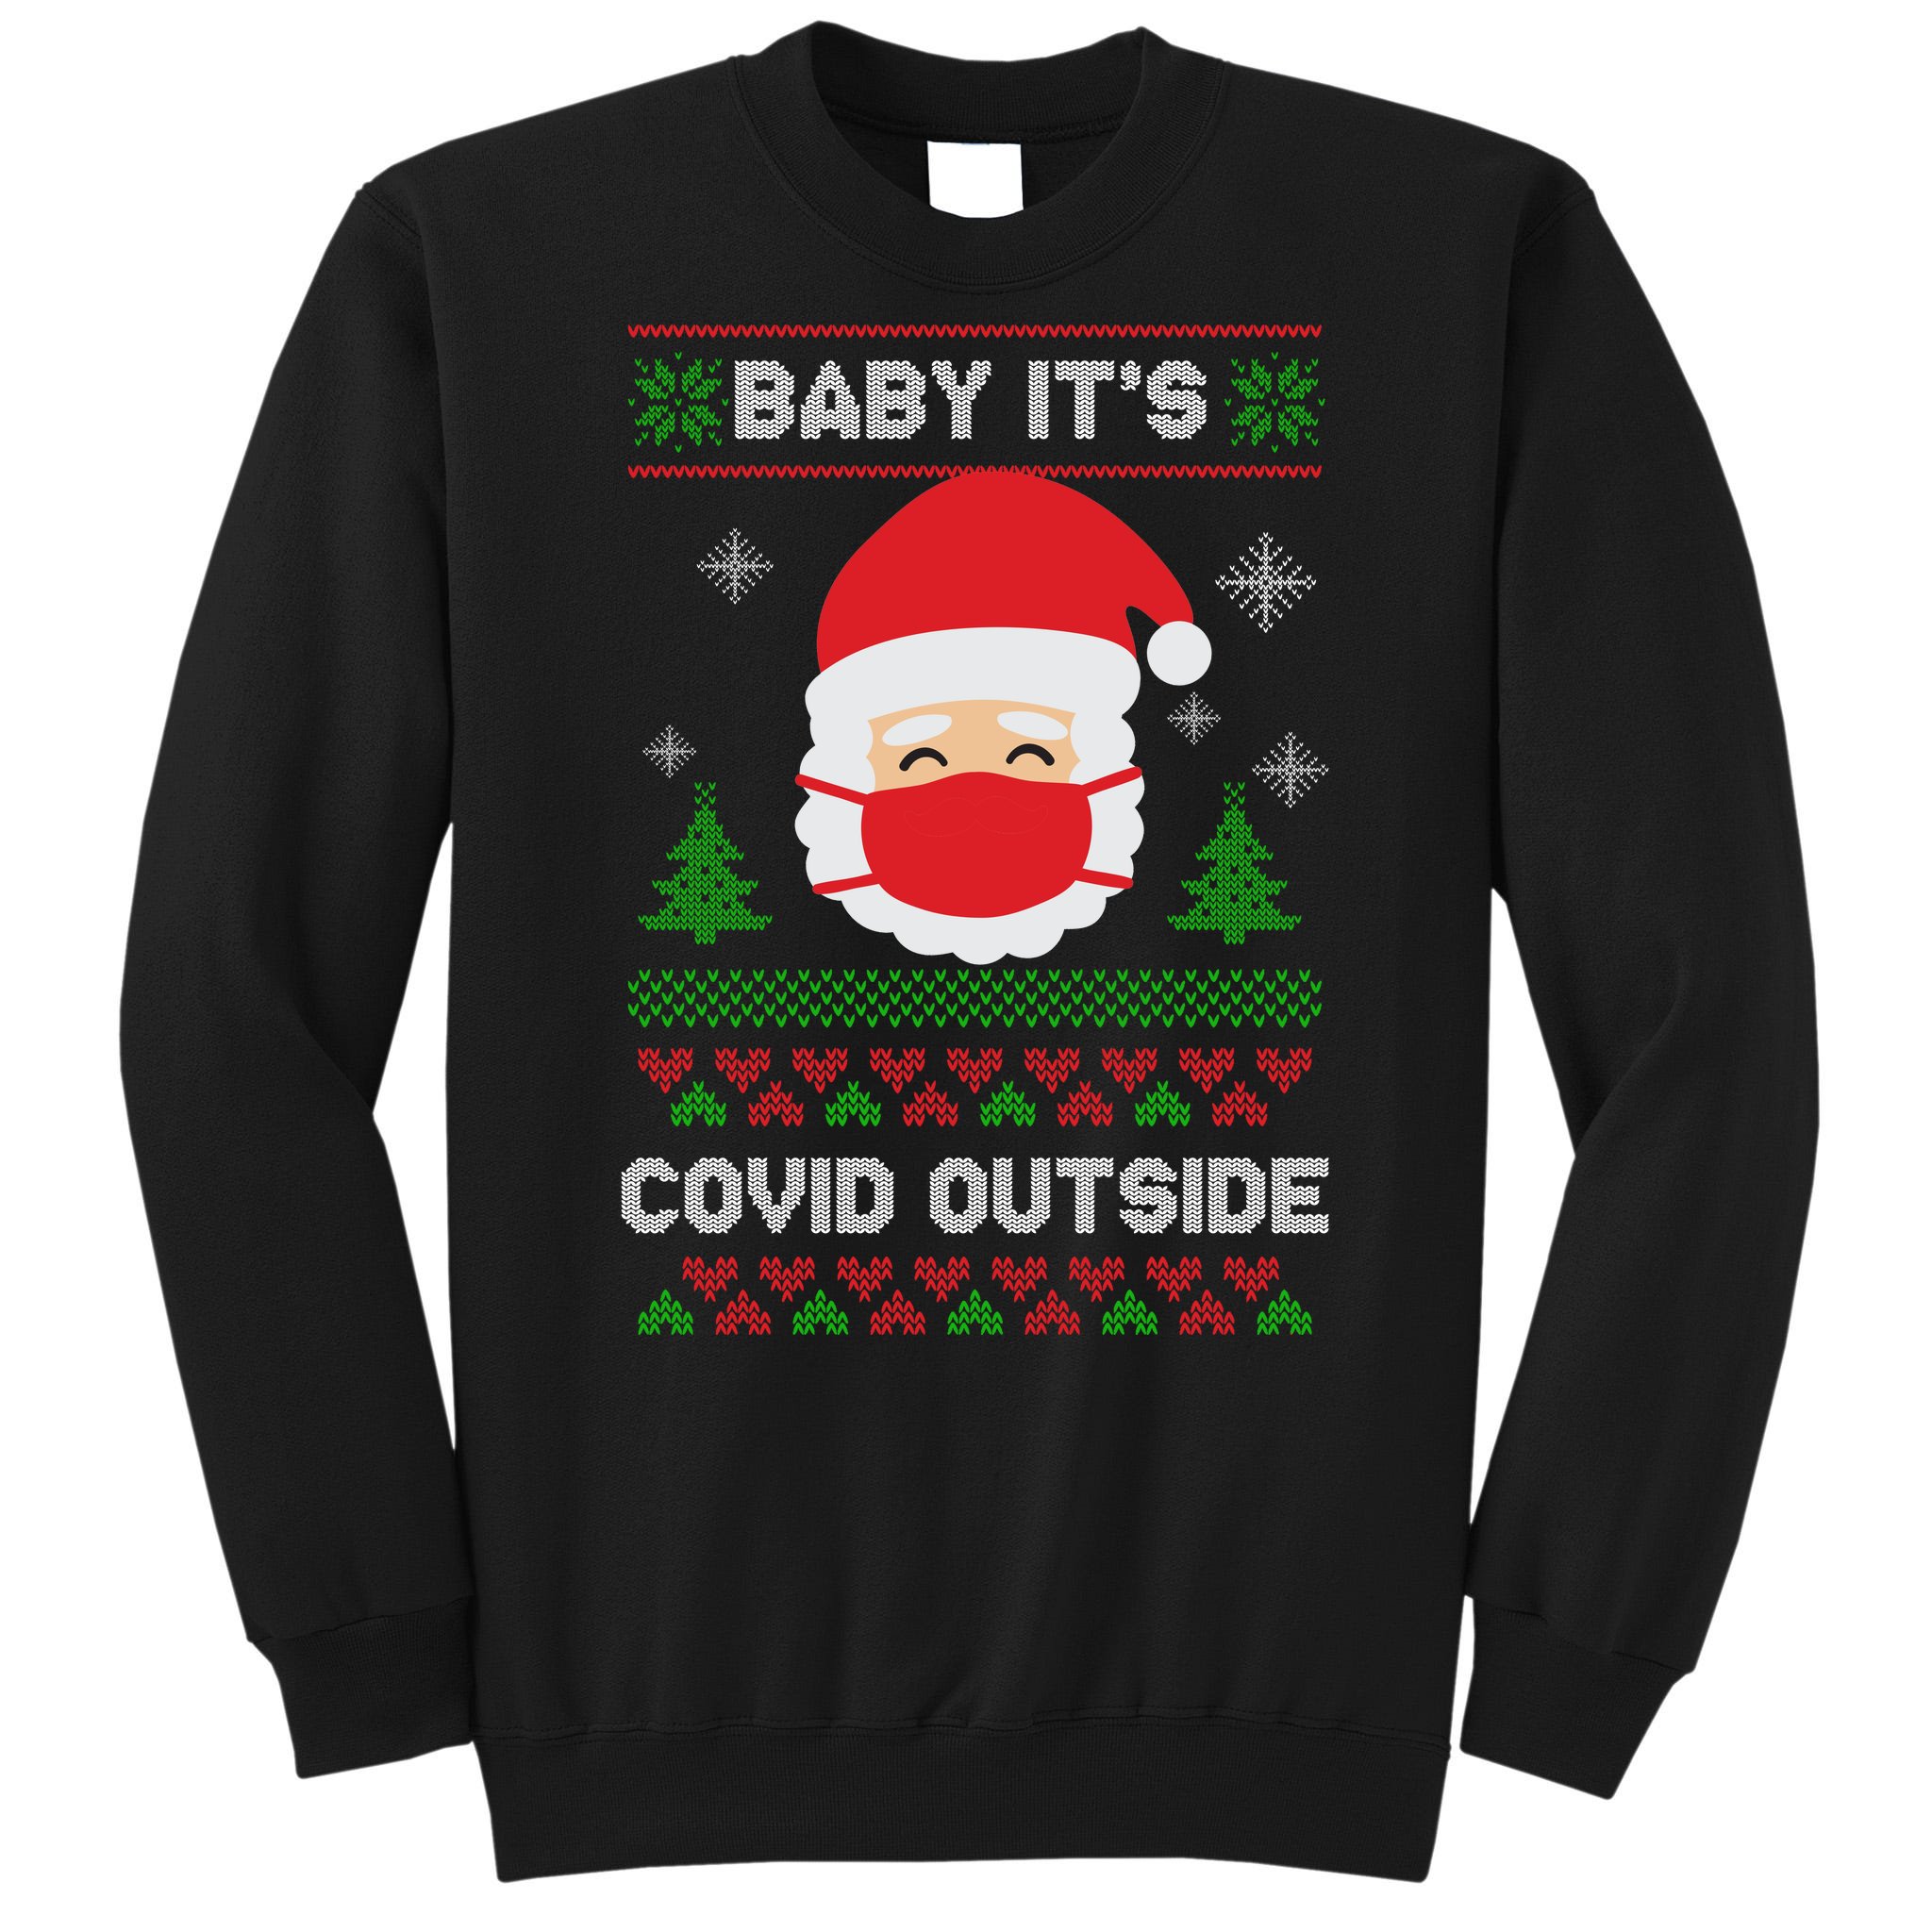 2020 Quarantine Christmas Matching Family Baby It's Covid Outside Funny Christmas Sweatshirt Christmas Gnomes with Masks Sweater